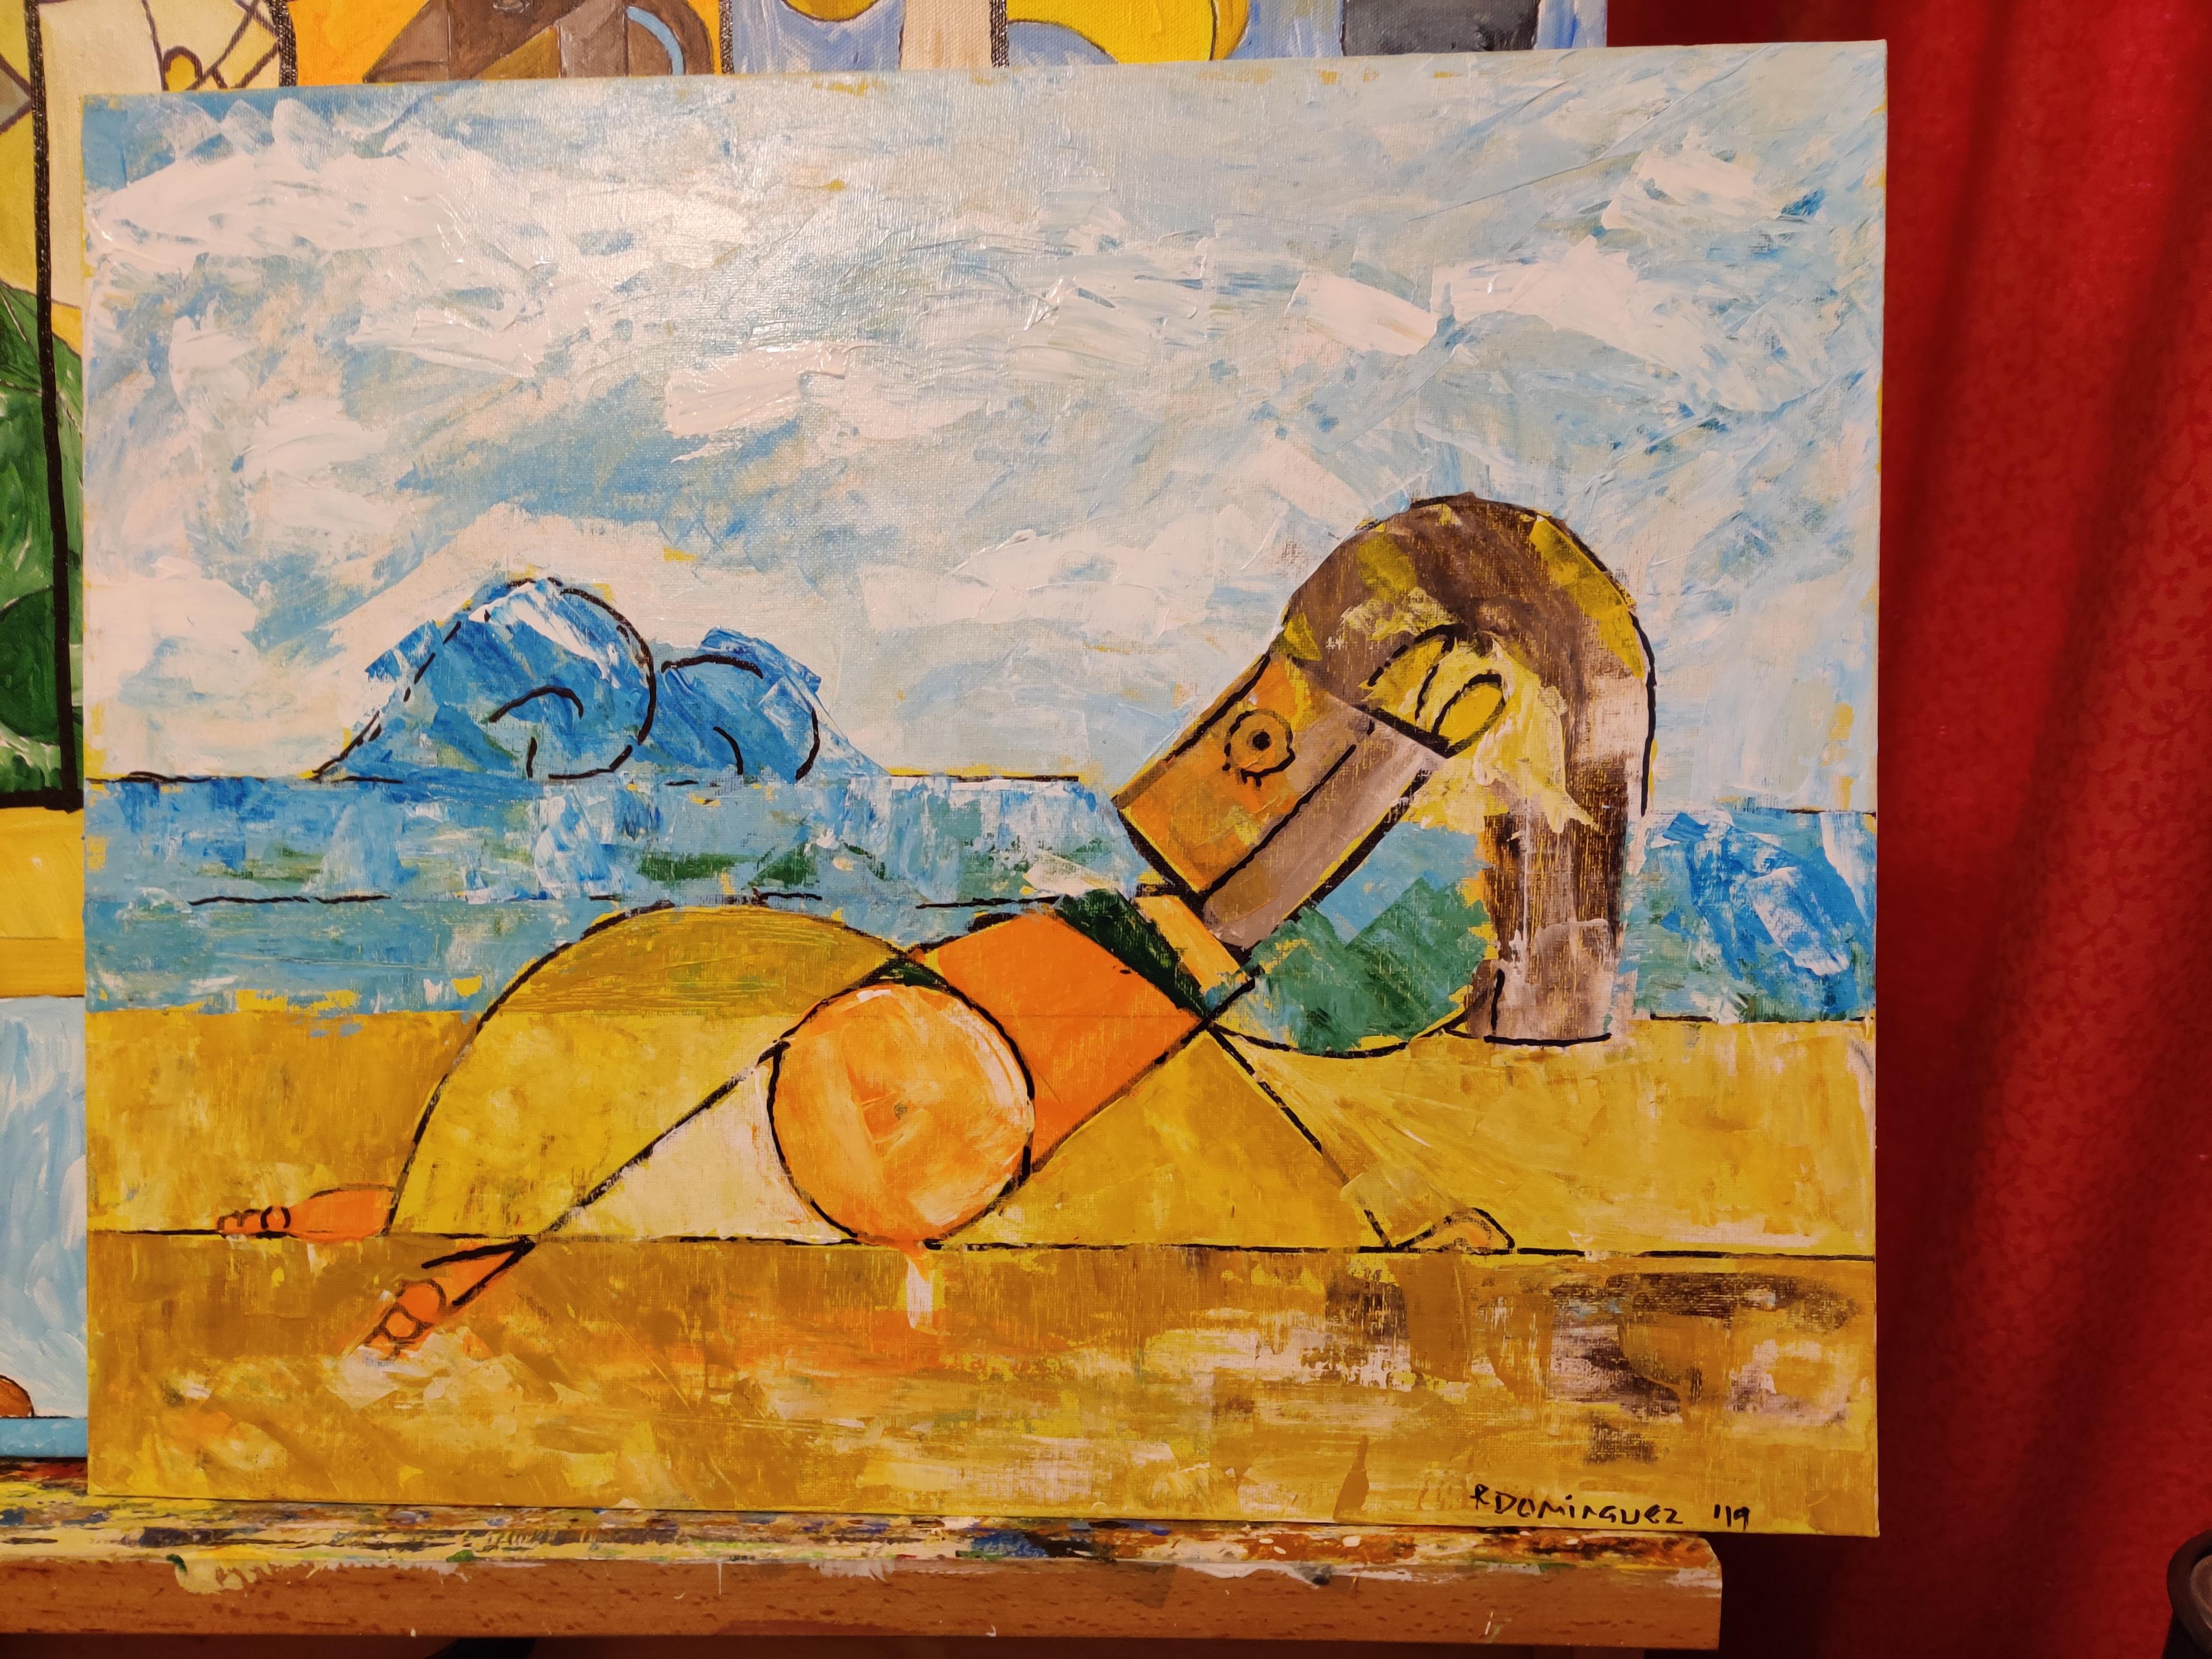 Abstract painting of a sunbather on a beach